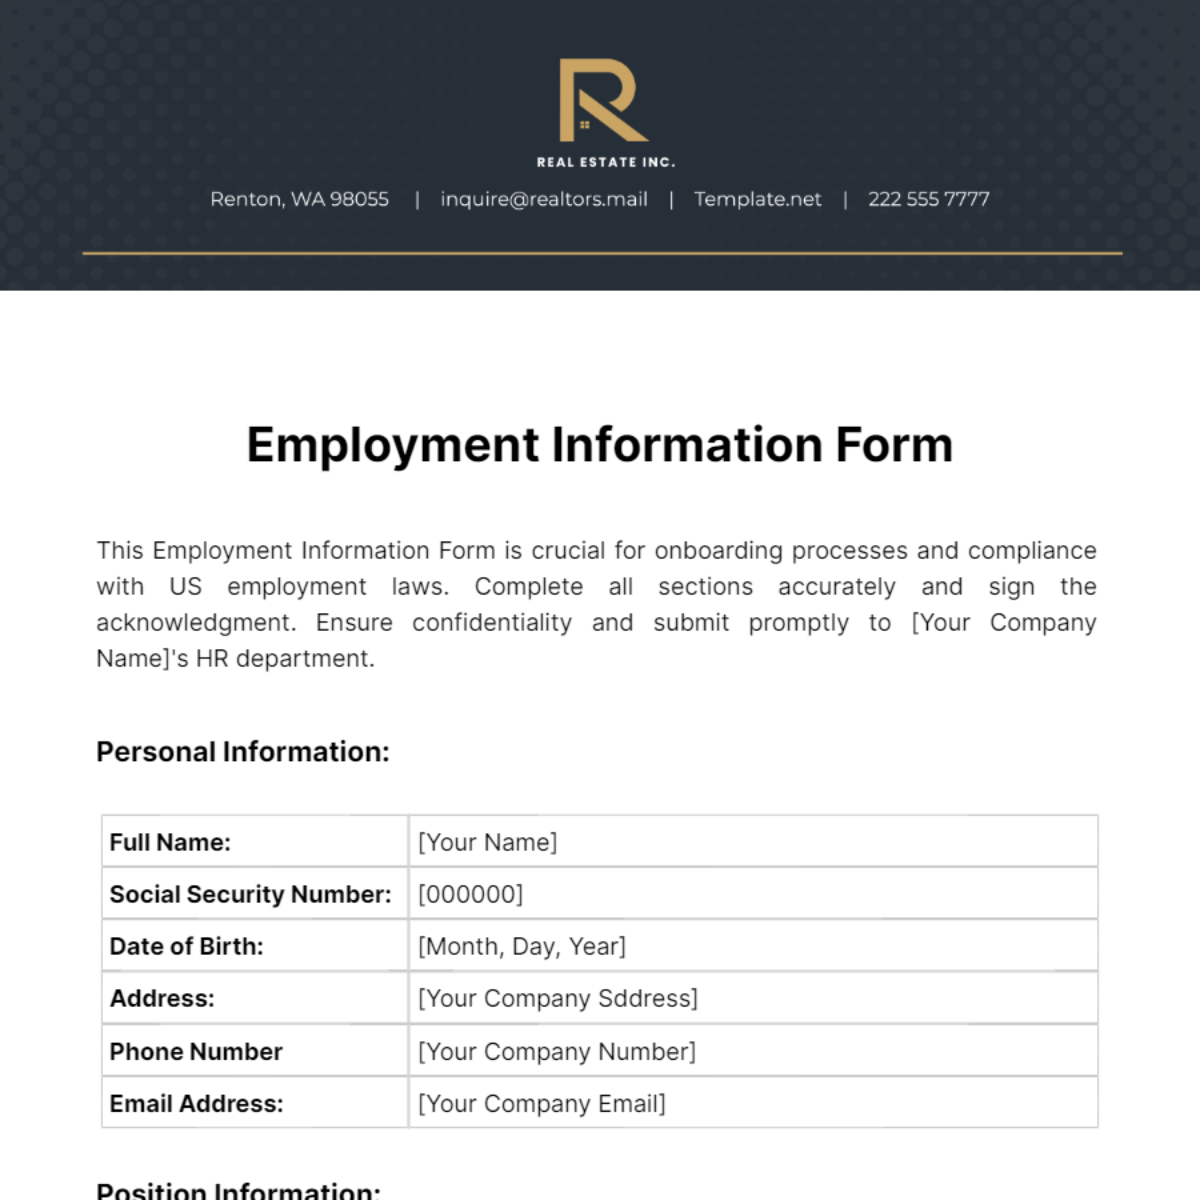 Real Estate Employment Information Form Template